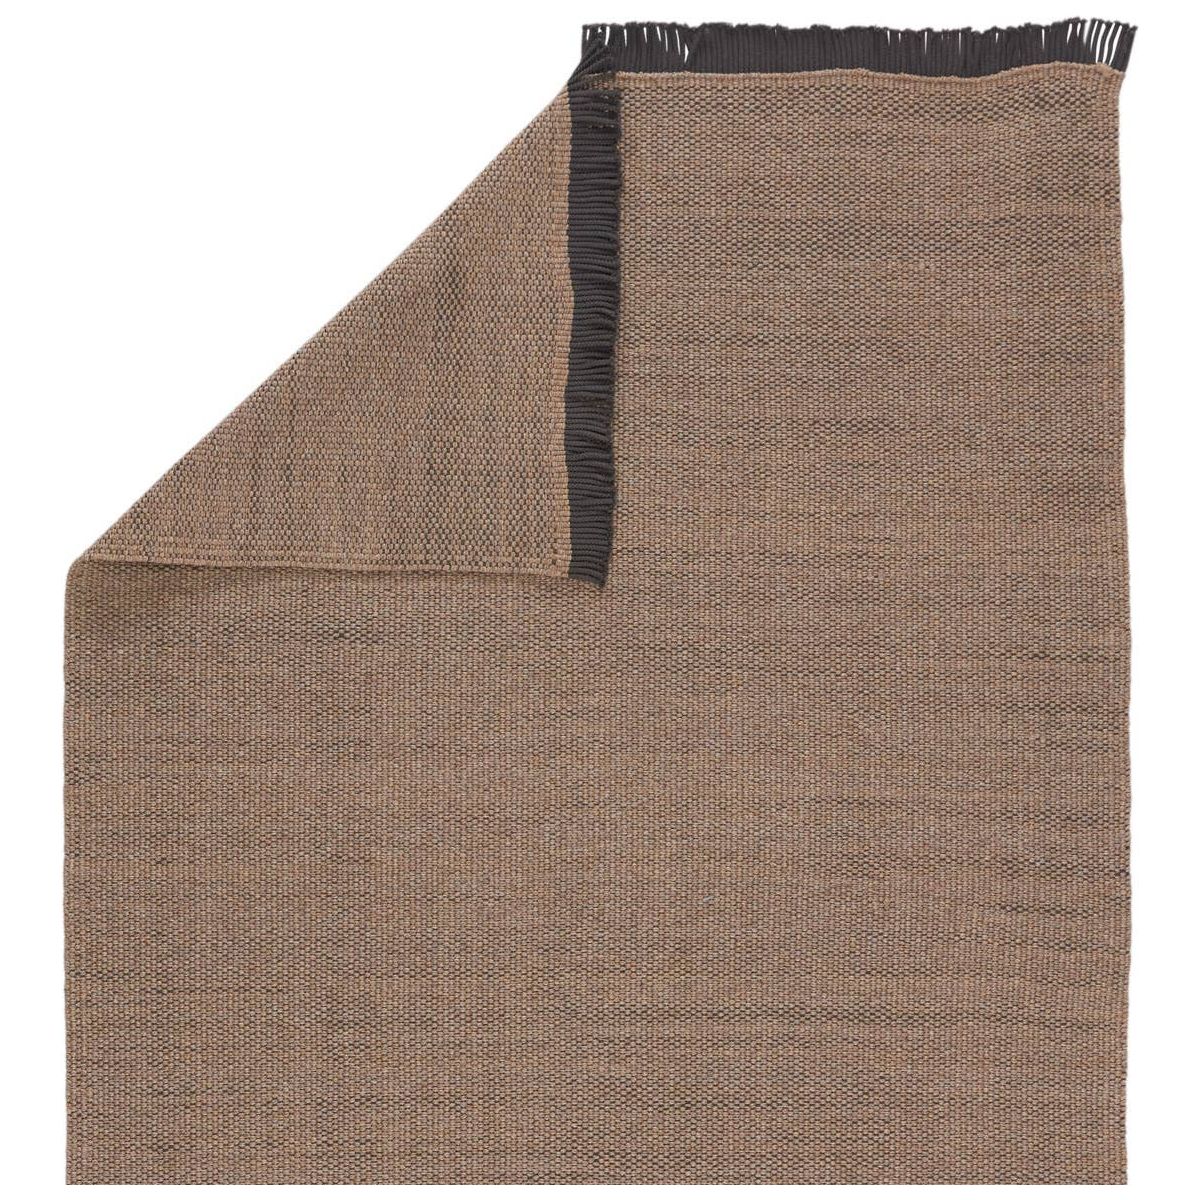 The Jaipur living Sonder Savvy Area Rug, or SOD01, offers a solid, basic design with natural-inspired texture that works for both indoor and outdoor spaces.  This rug features a durable, easy-to-clean polypropylene construction with distinctive corded fringe trim for a textural twist.